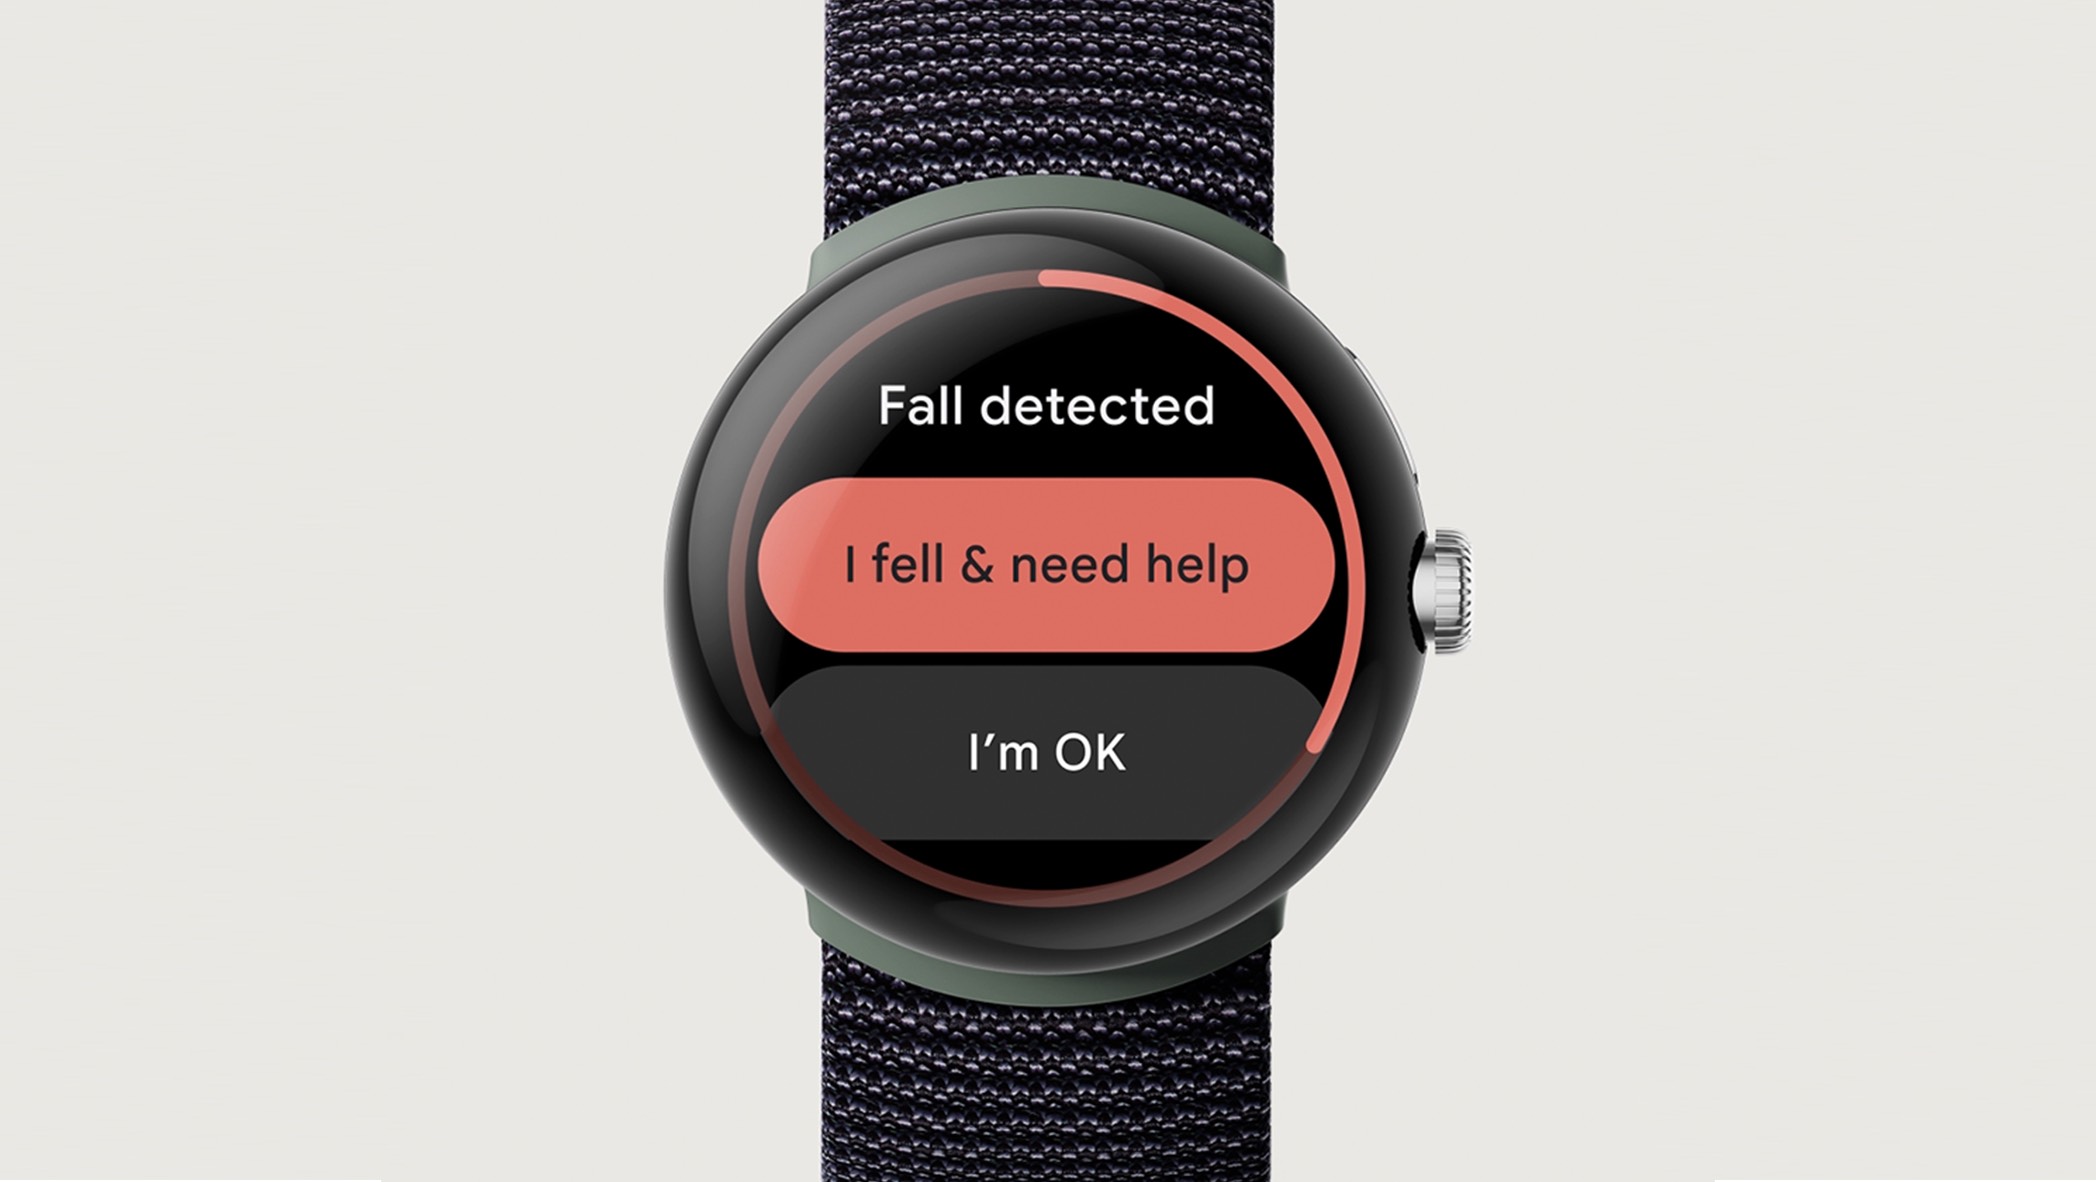 Google Watch interface that shows the on-screen notification saying ‘Fall detected’ followed by two options to click: ‘I fell & need help’ or ‘I’m OK’.